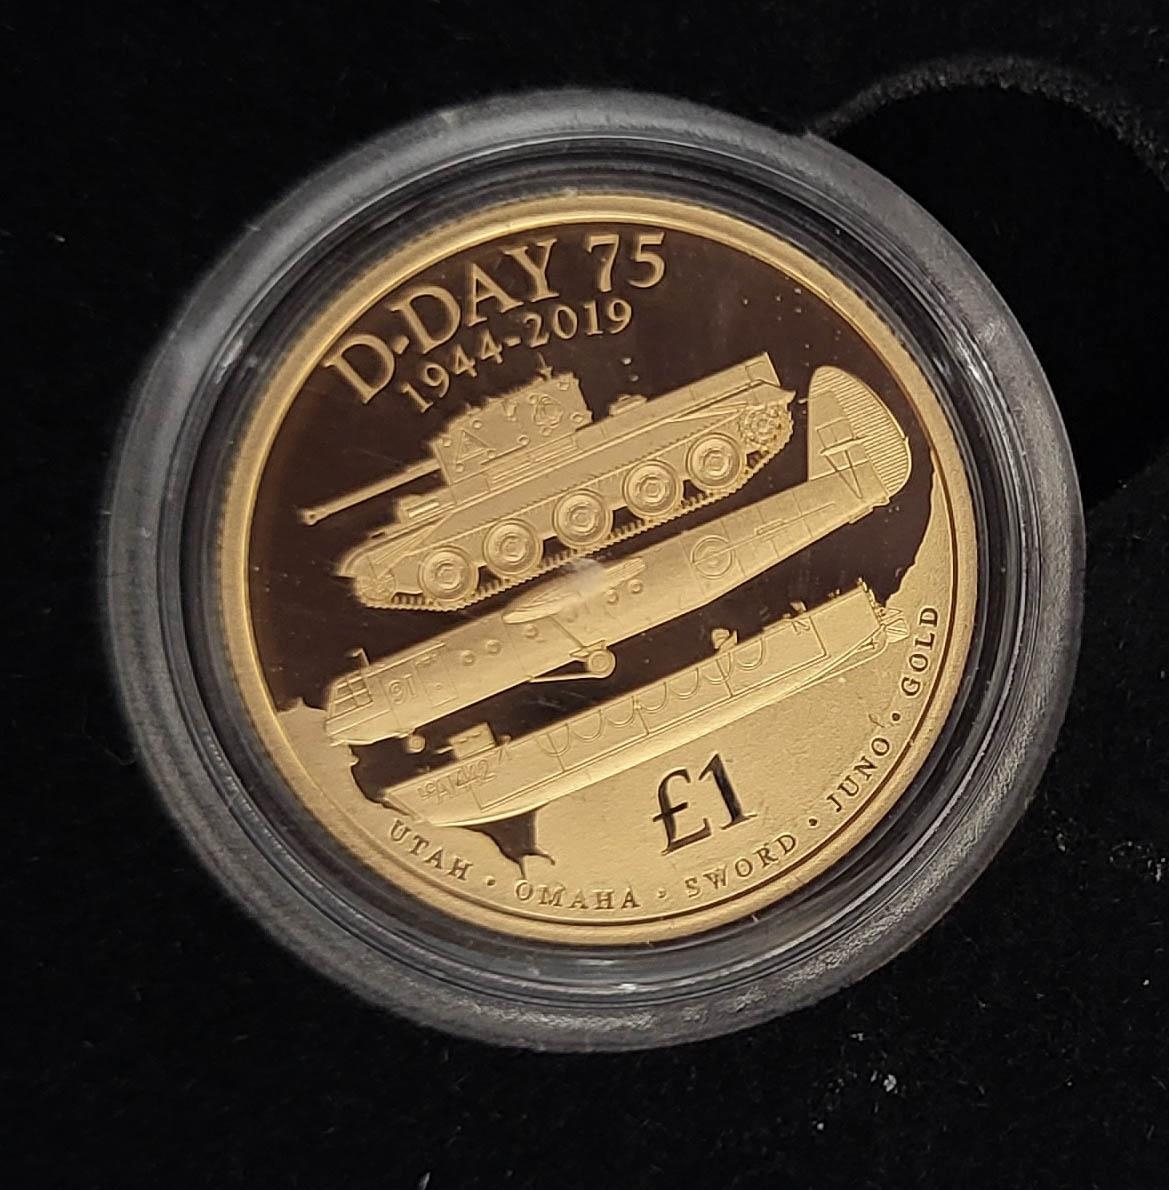 A 22CT GOLD 'D-DAY LANDINGS ' FULL SOVEREIGN PROOF COIN, DATED 2019 With Cromwell tank MK 1V, - Image 3 of 5